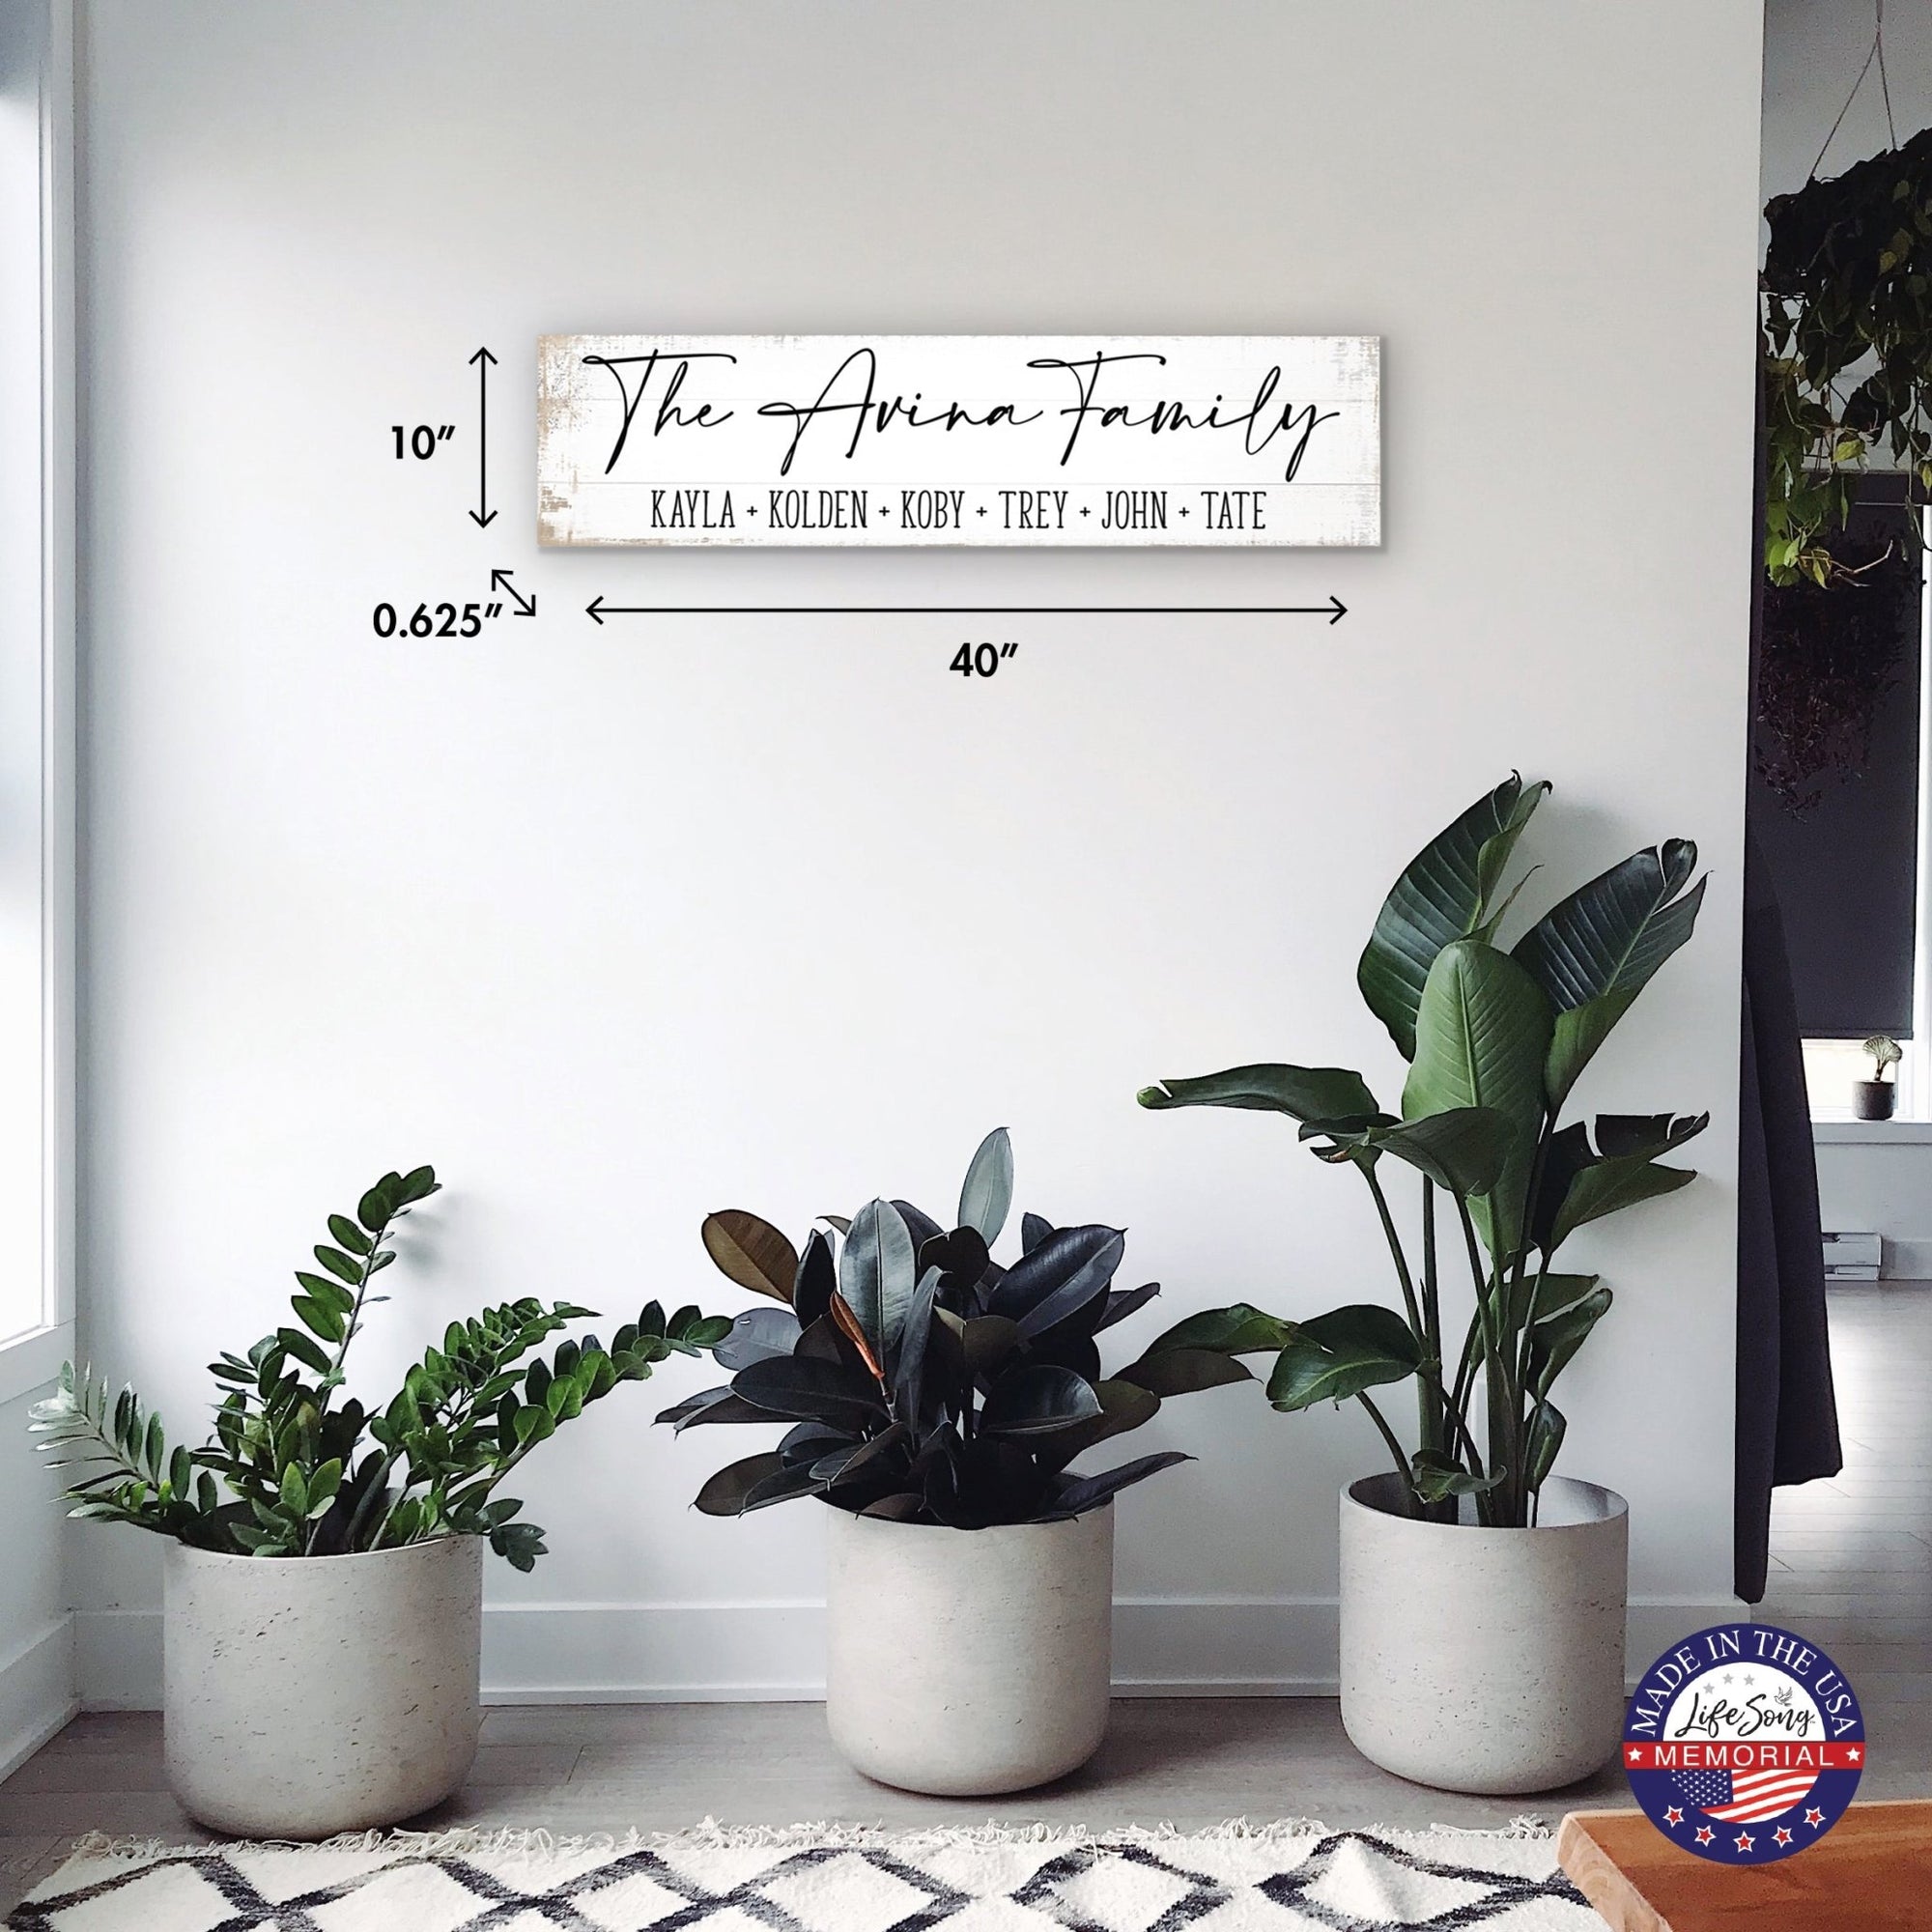 Personalized Family Wall Hanging Plaque for Home Décor Ideas - The Avina Family - LifeSong Milestones